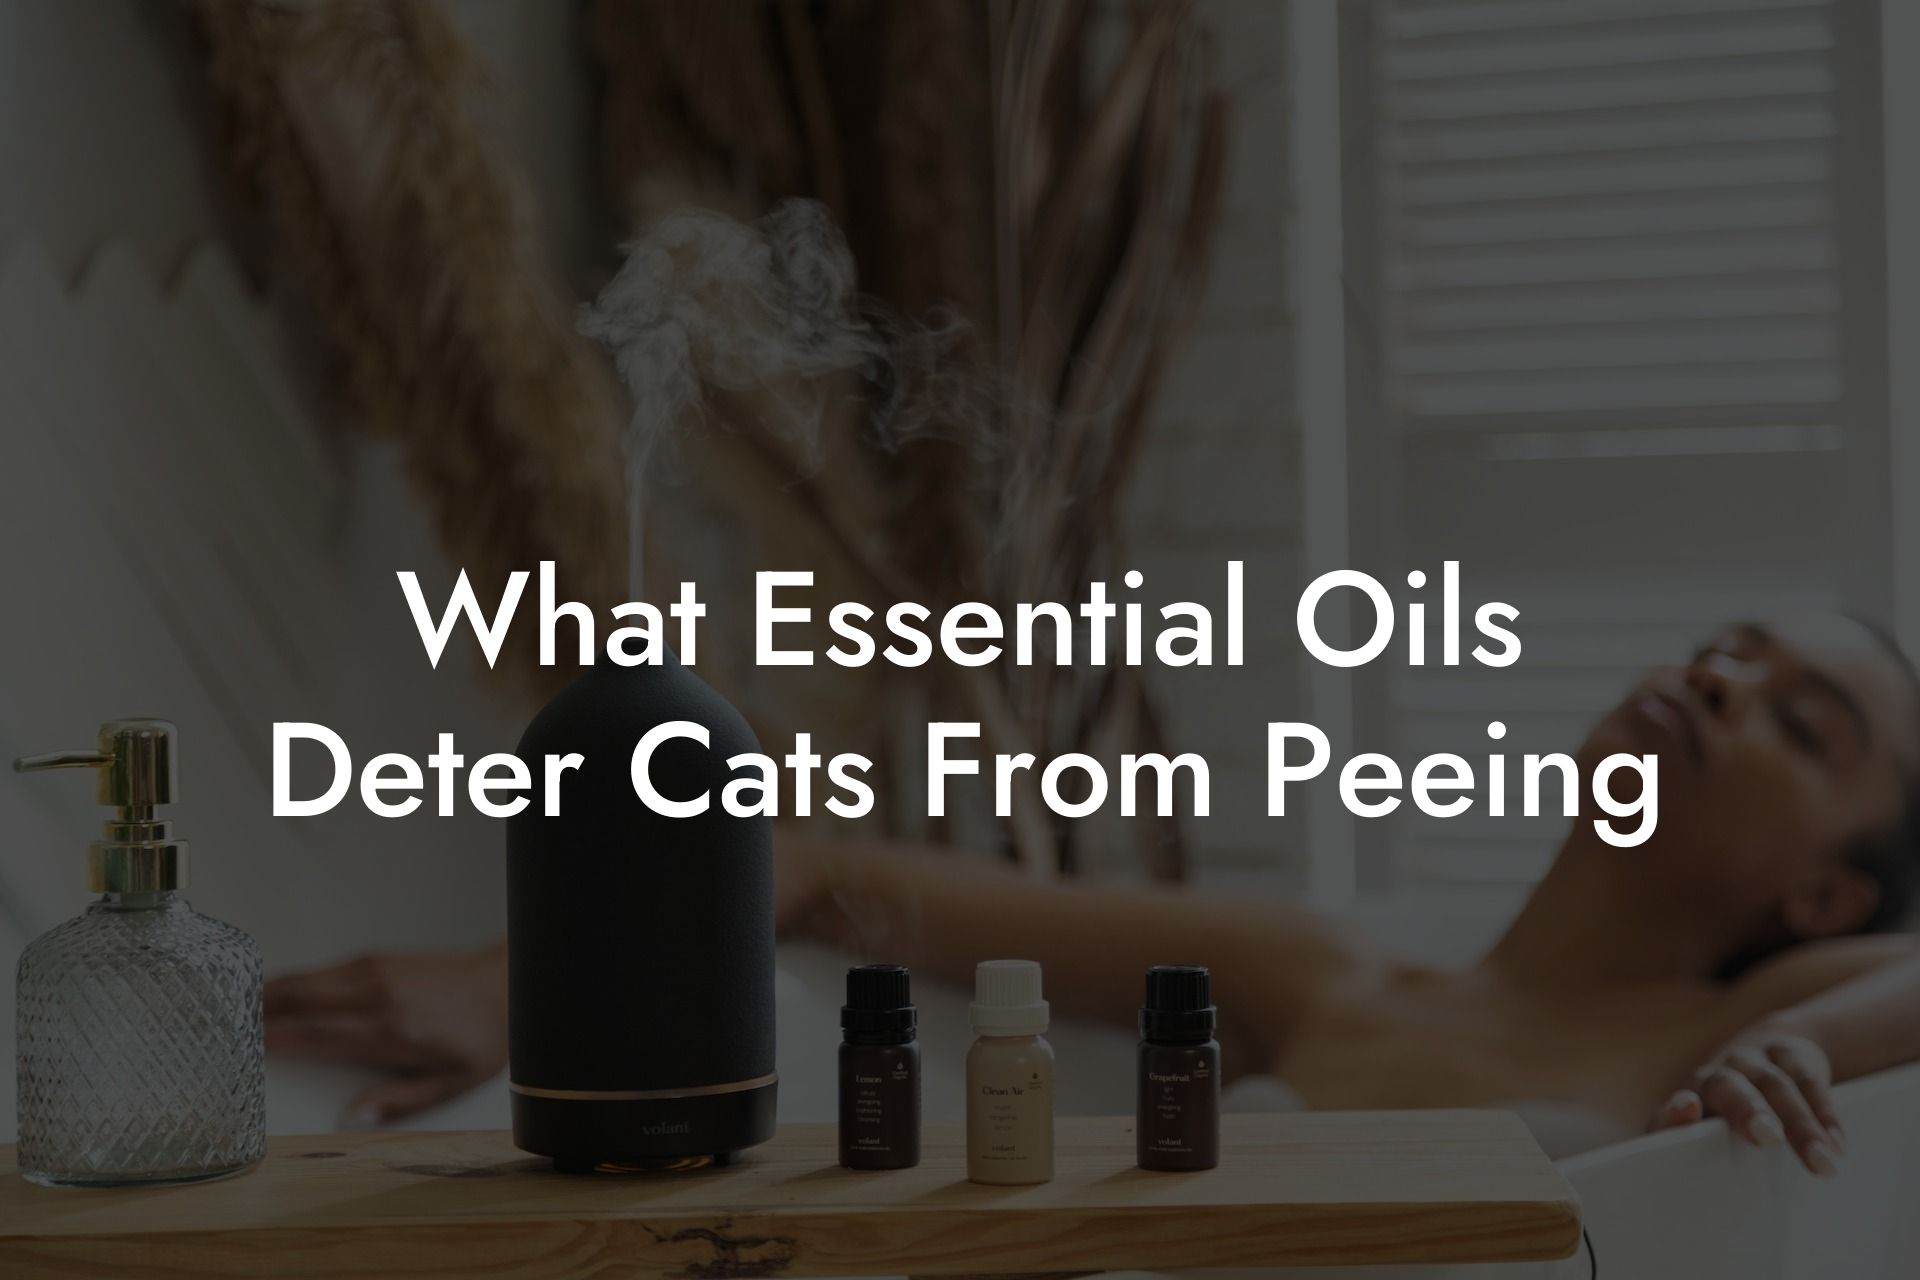 What Essential Oils Deter Cats From Peeing